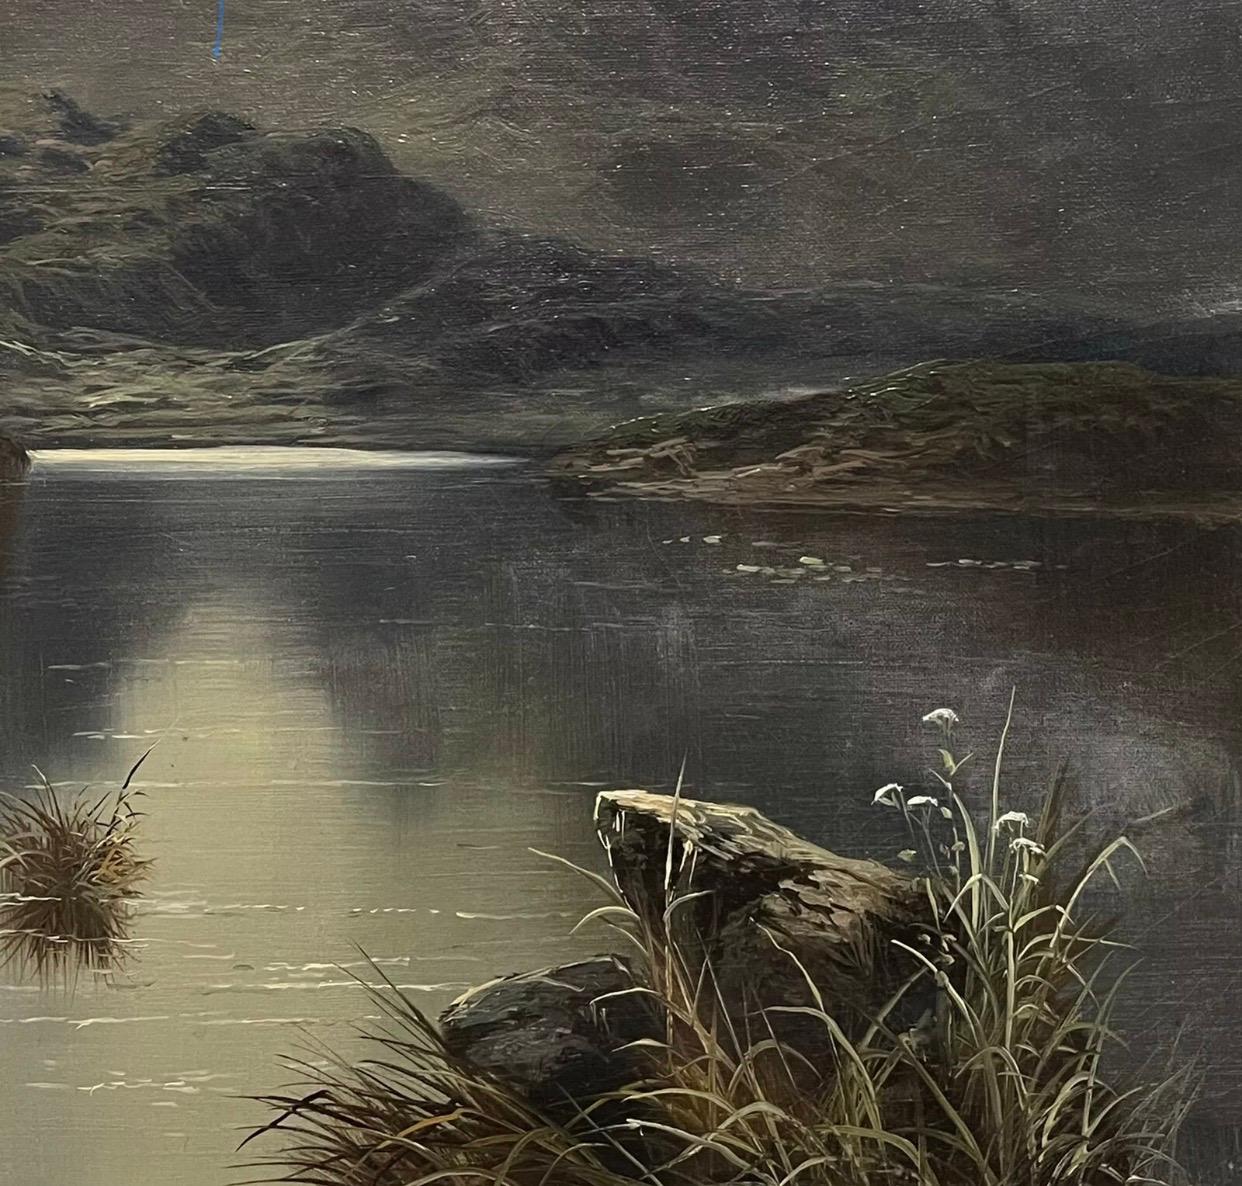 Artist/ School: David Hicks, British late 19th century, signed

Title: The Scottish Highlands

Medium: signed oil painting on canvas, oak wood framed

Size:

framed: 27.5 x 23.5 inches
canvas: 21 x 17 inches

Provenance: private collection,